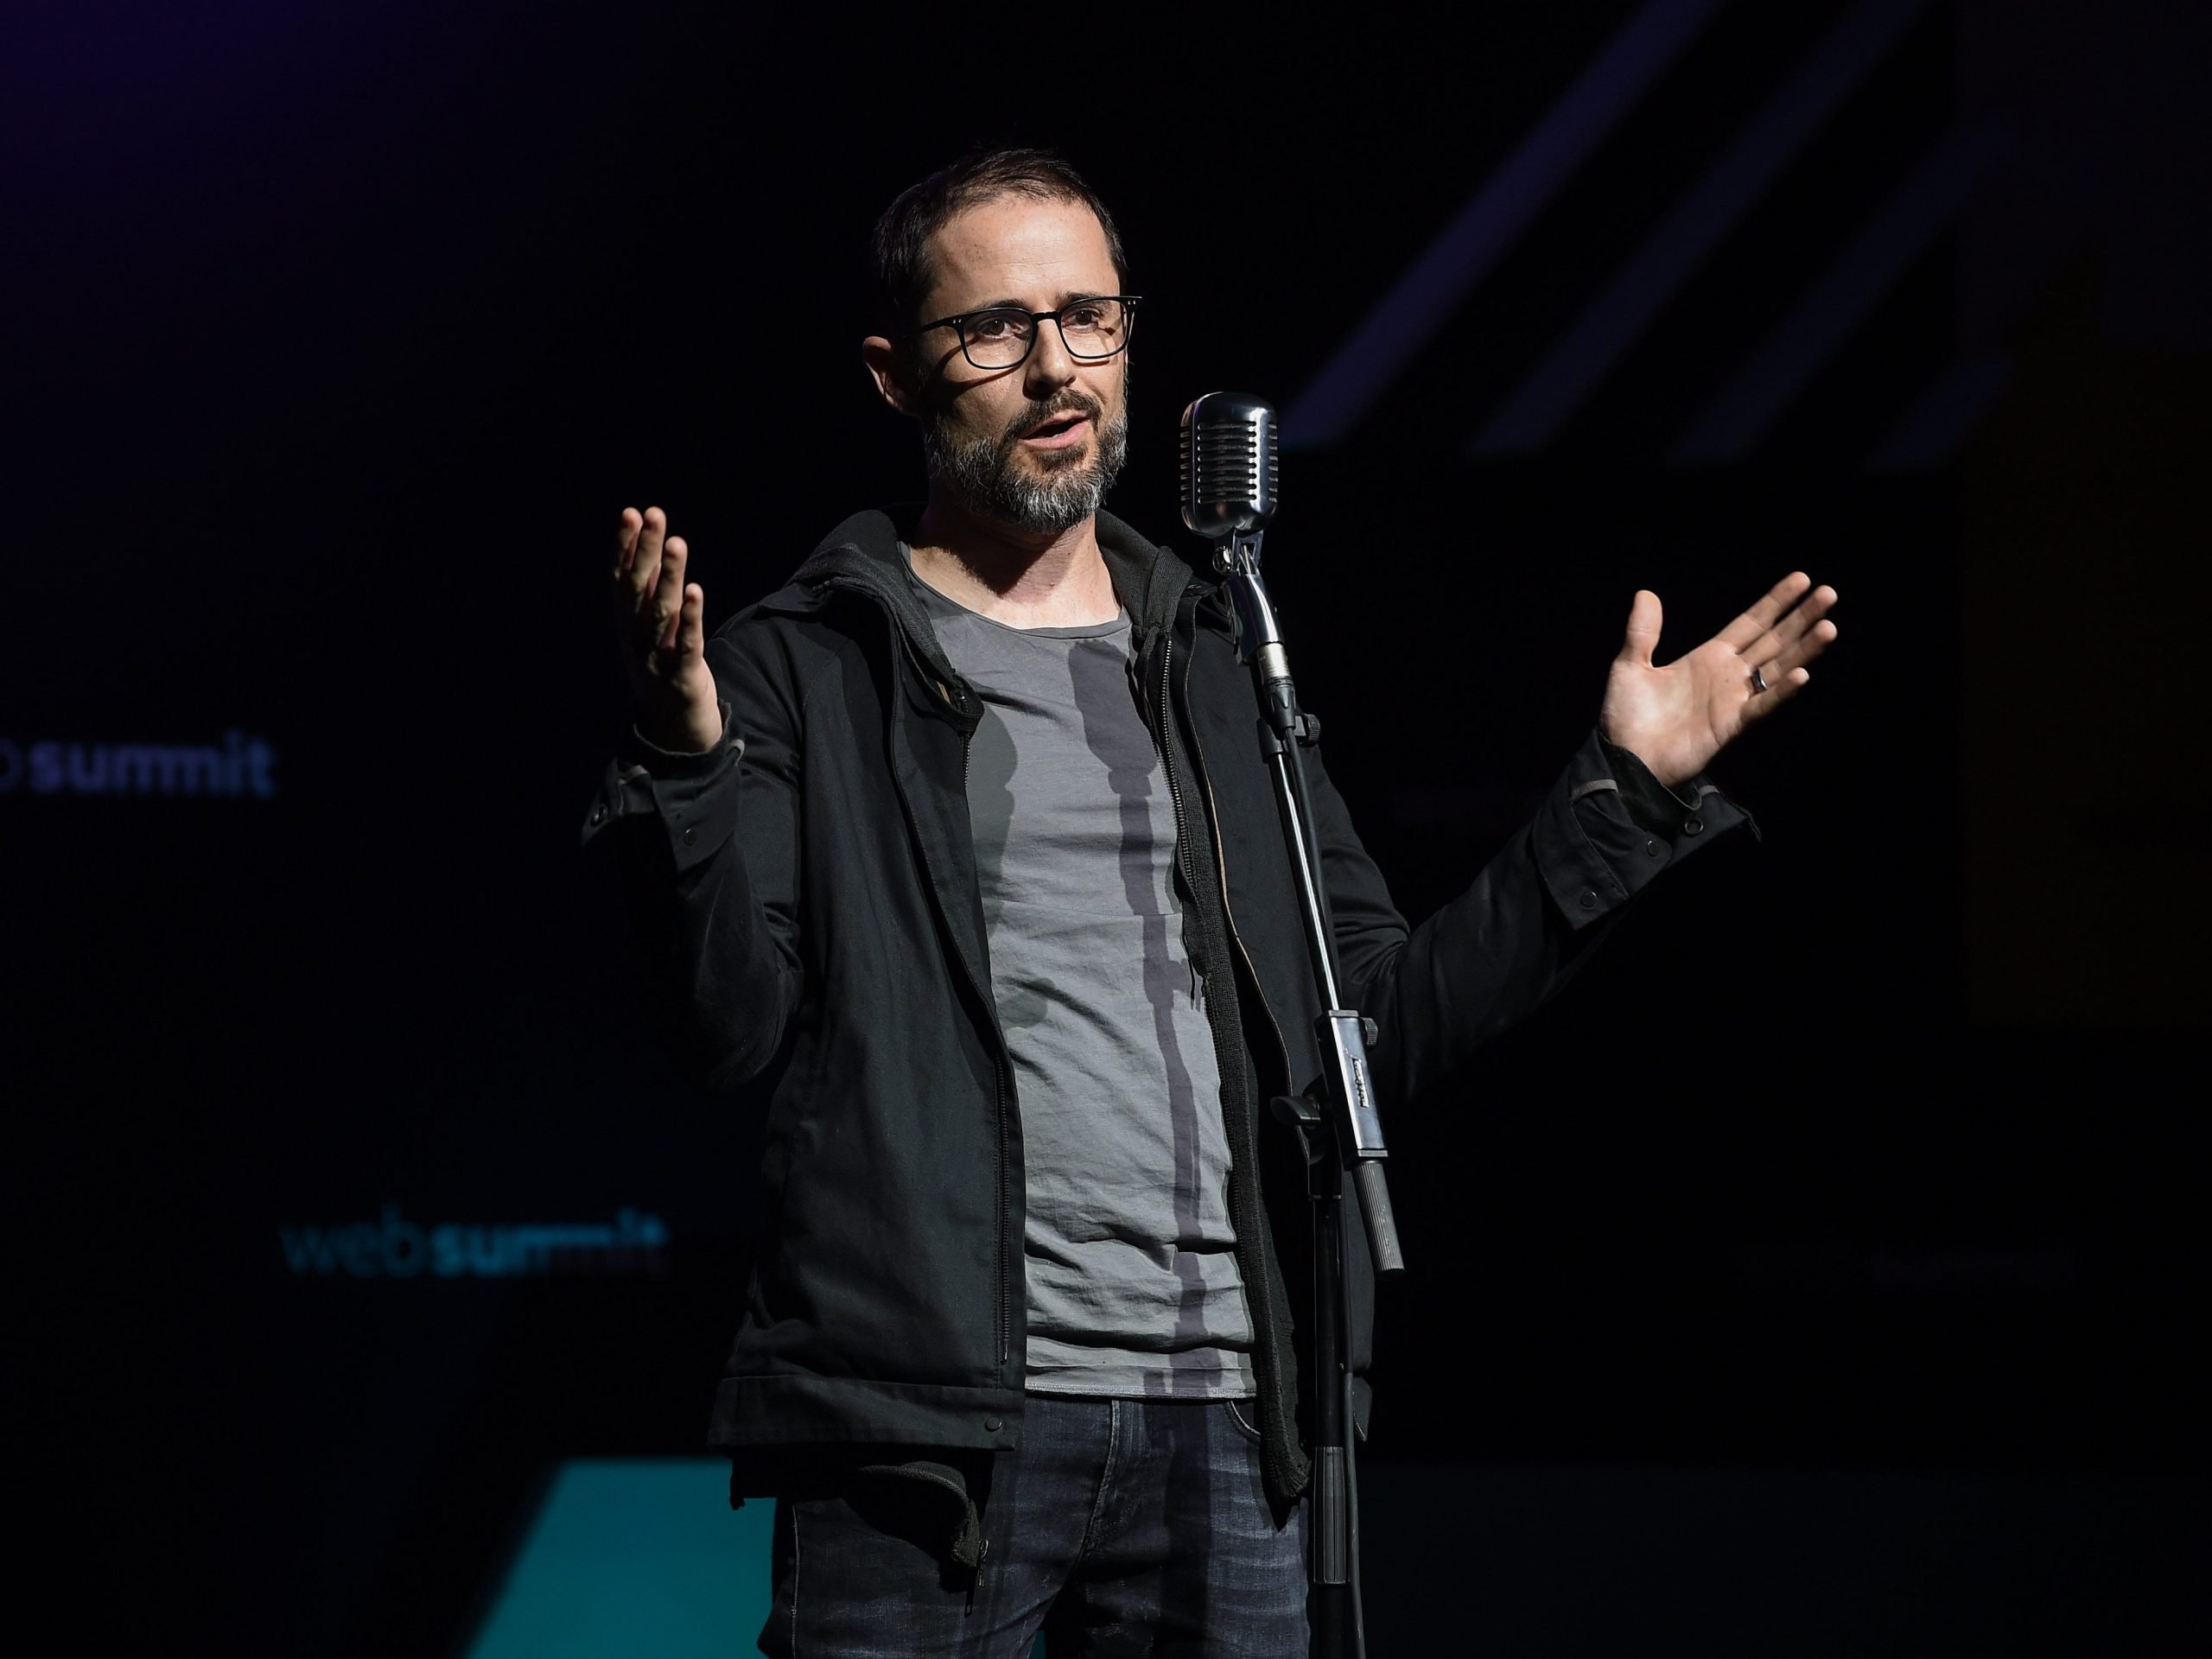 ev williams medium ceo twitter LISBON, PORTUGAL - NOVEMBER 08: Ev Williams, Founder & CEO, Medium, on ContentMakers Stage during day three of Web Summit 2018 at the Altice Arena on November 8, 2018 in Lisbon, Portugal. (Photo by Diarmuid Greene/Sportsfile via Getty Images )